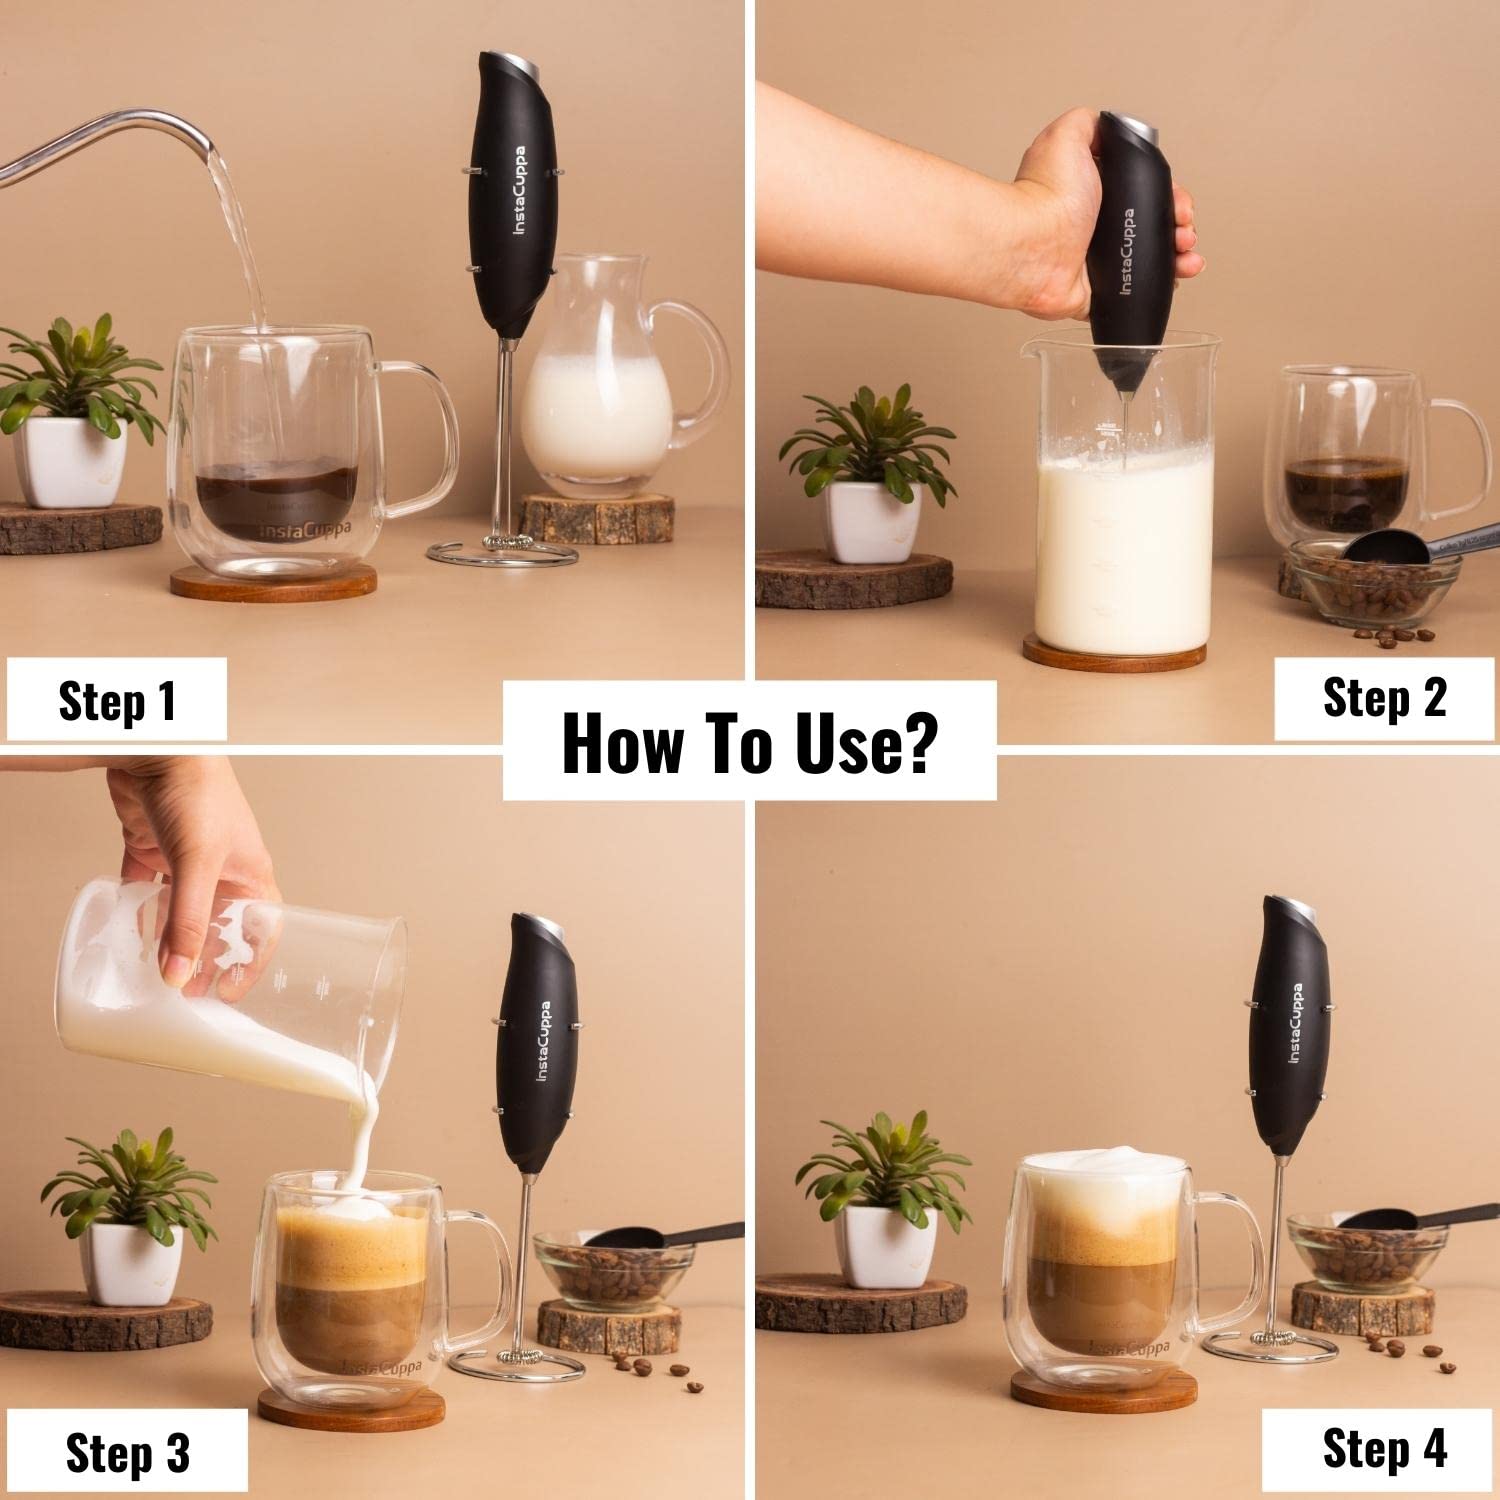 How To Make Bullet Proof Coffee With InstaCuppa Milk Frother? 